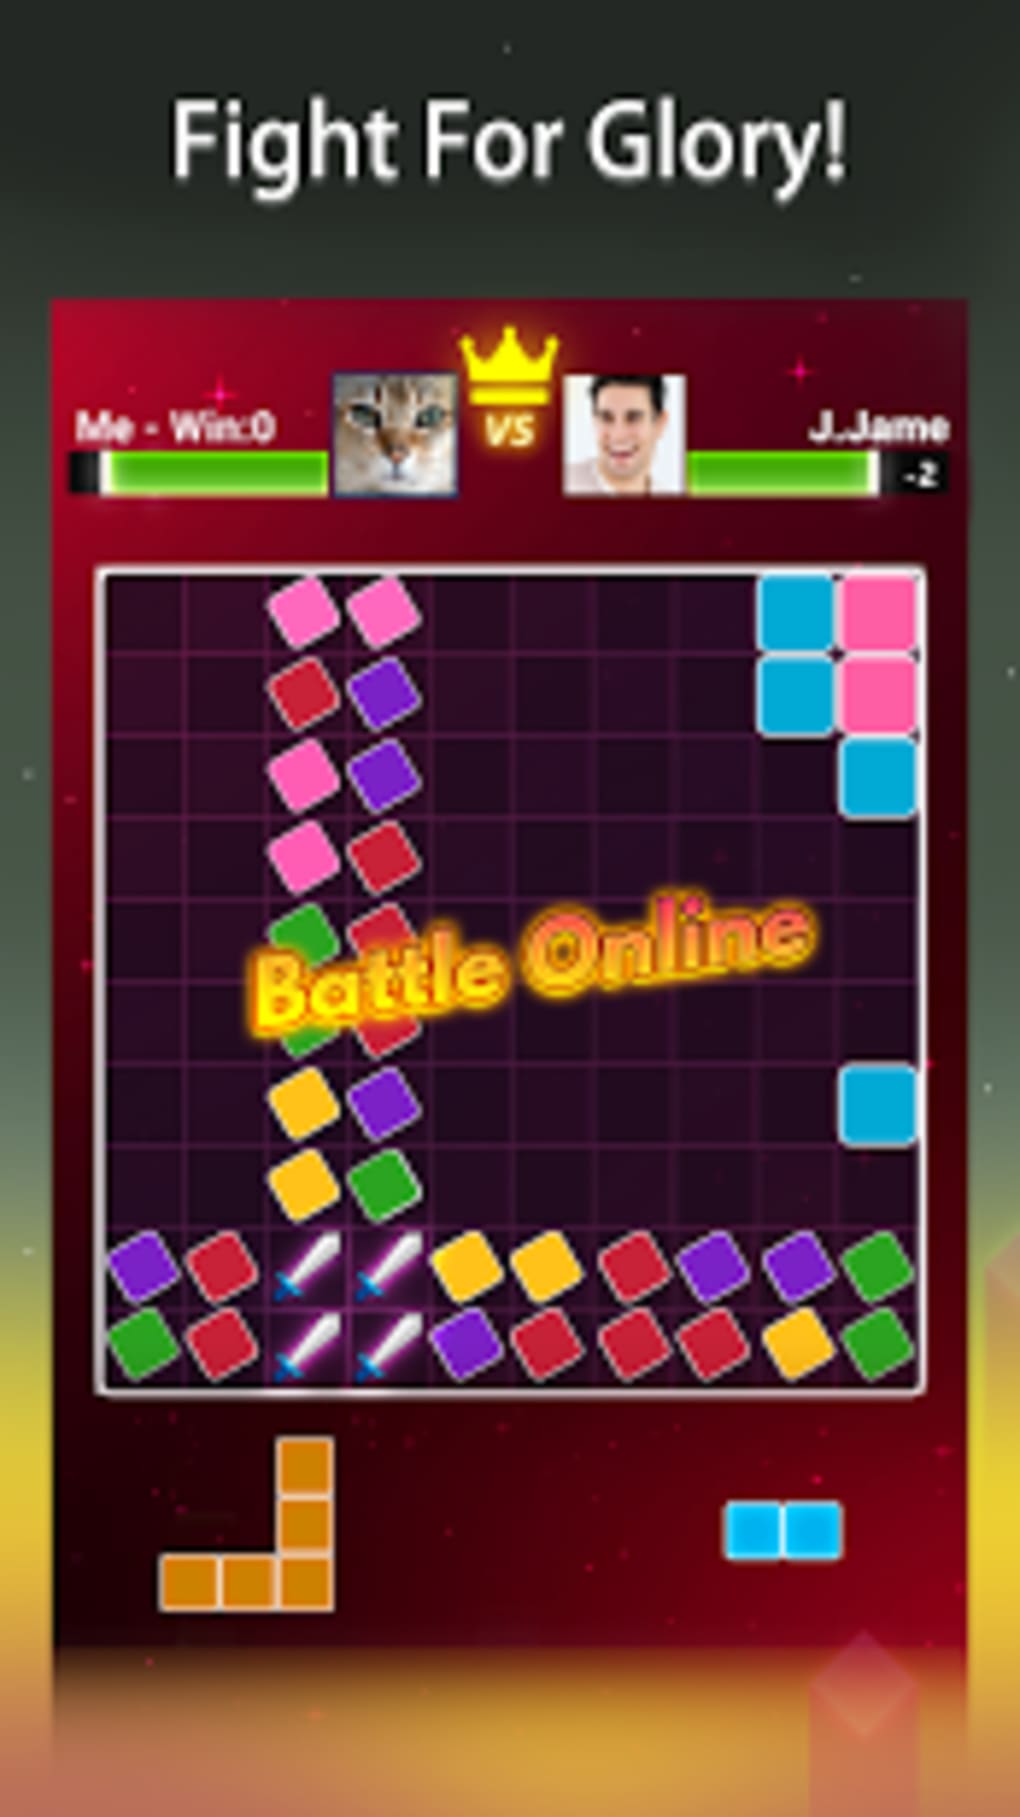 Block Puzzle Classic - Online Game - Play for Free